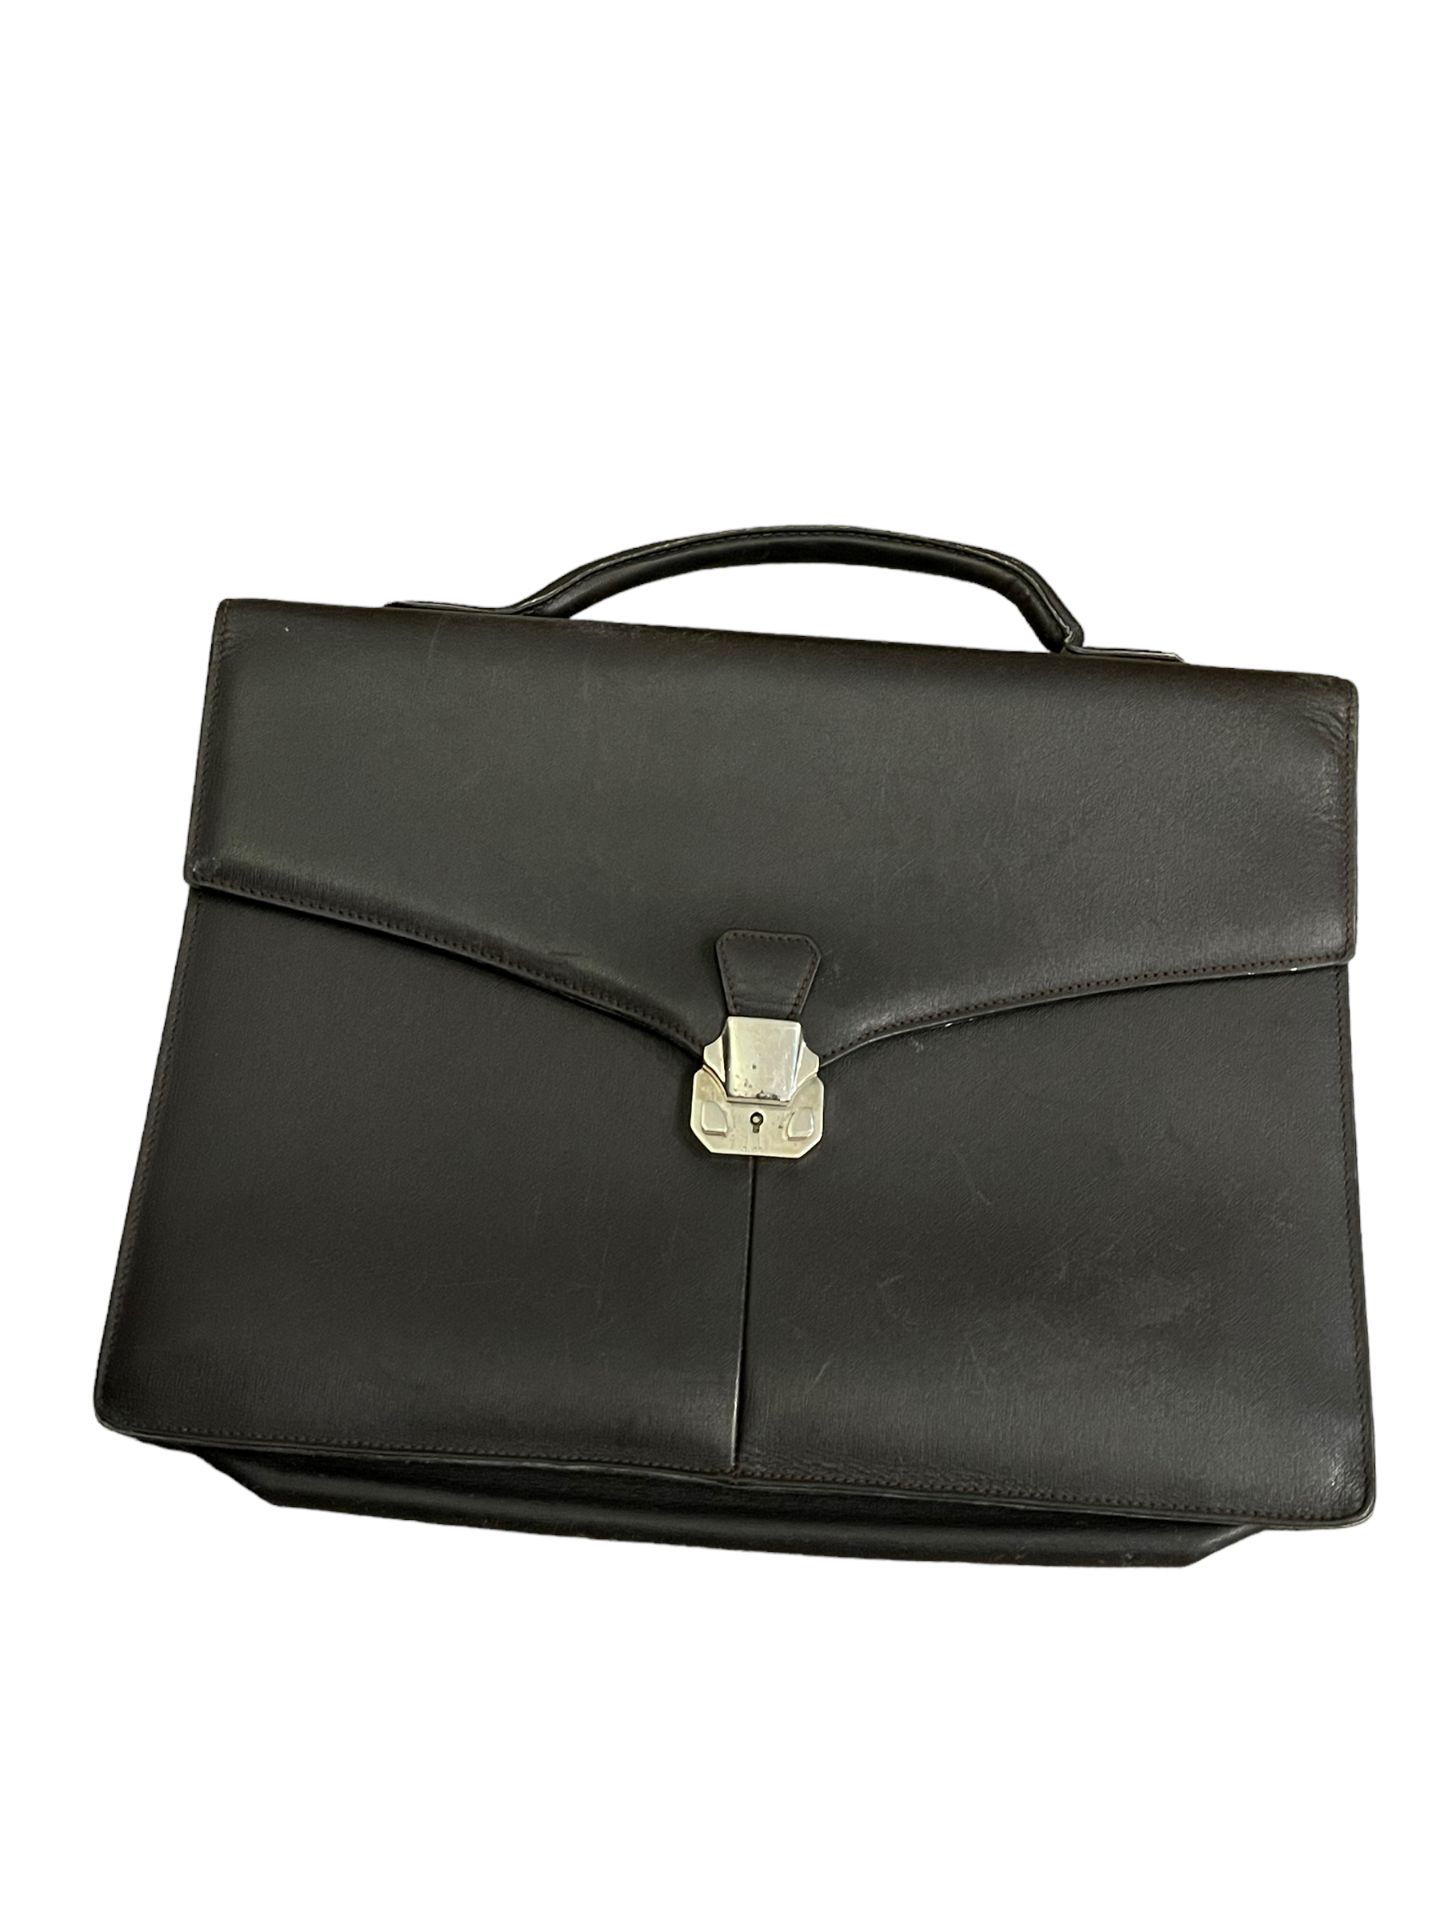 Dunhill Leather lost baggage from private. jet charter